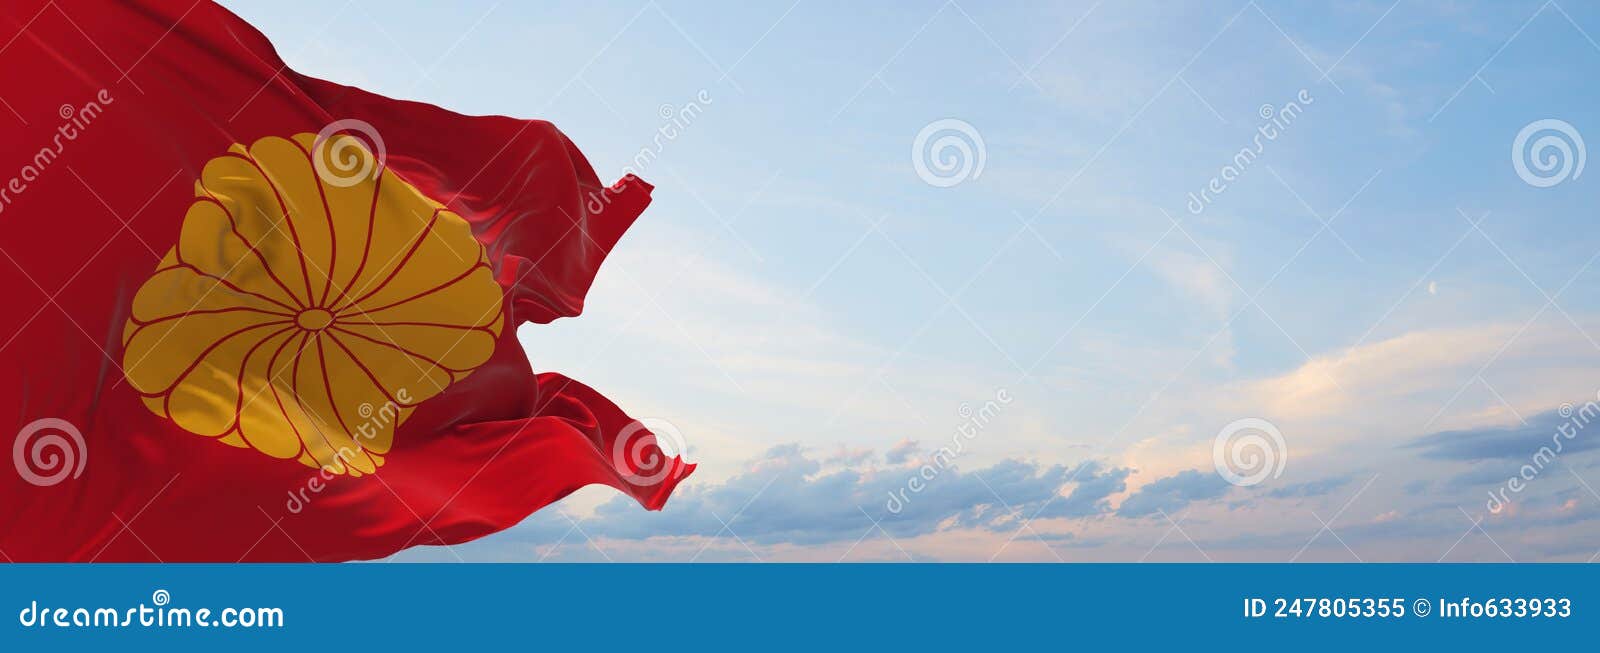 official flag of empress dowager, japan at cloudy sky background